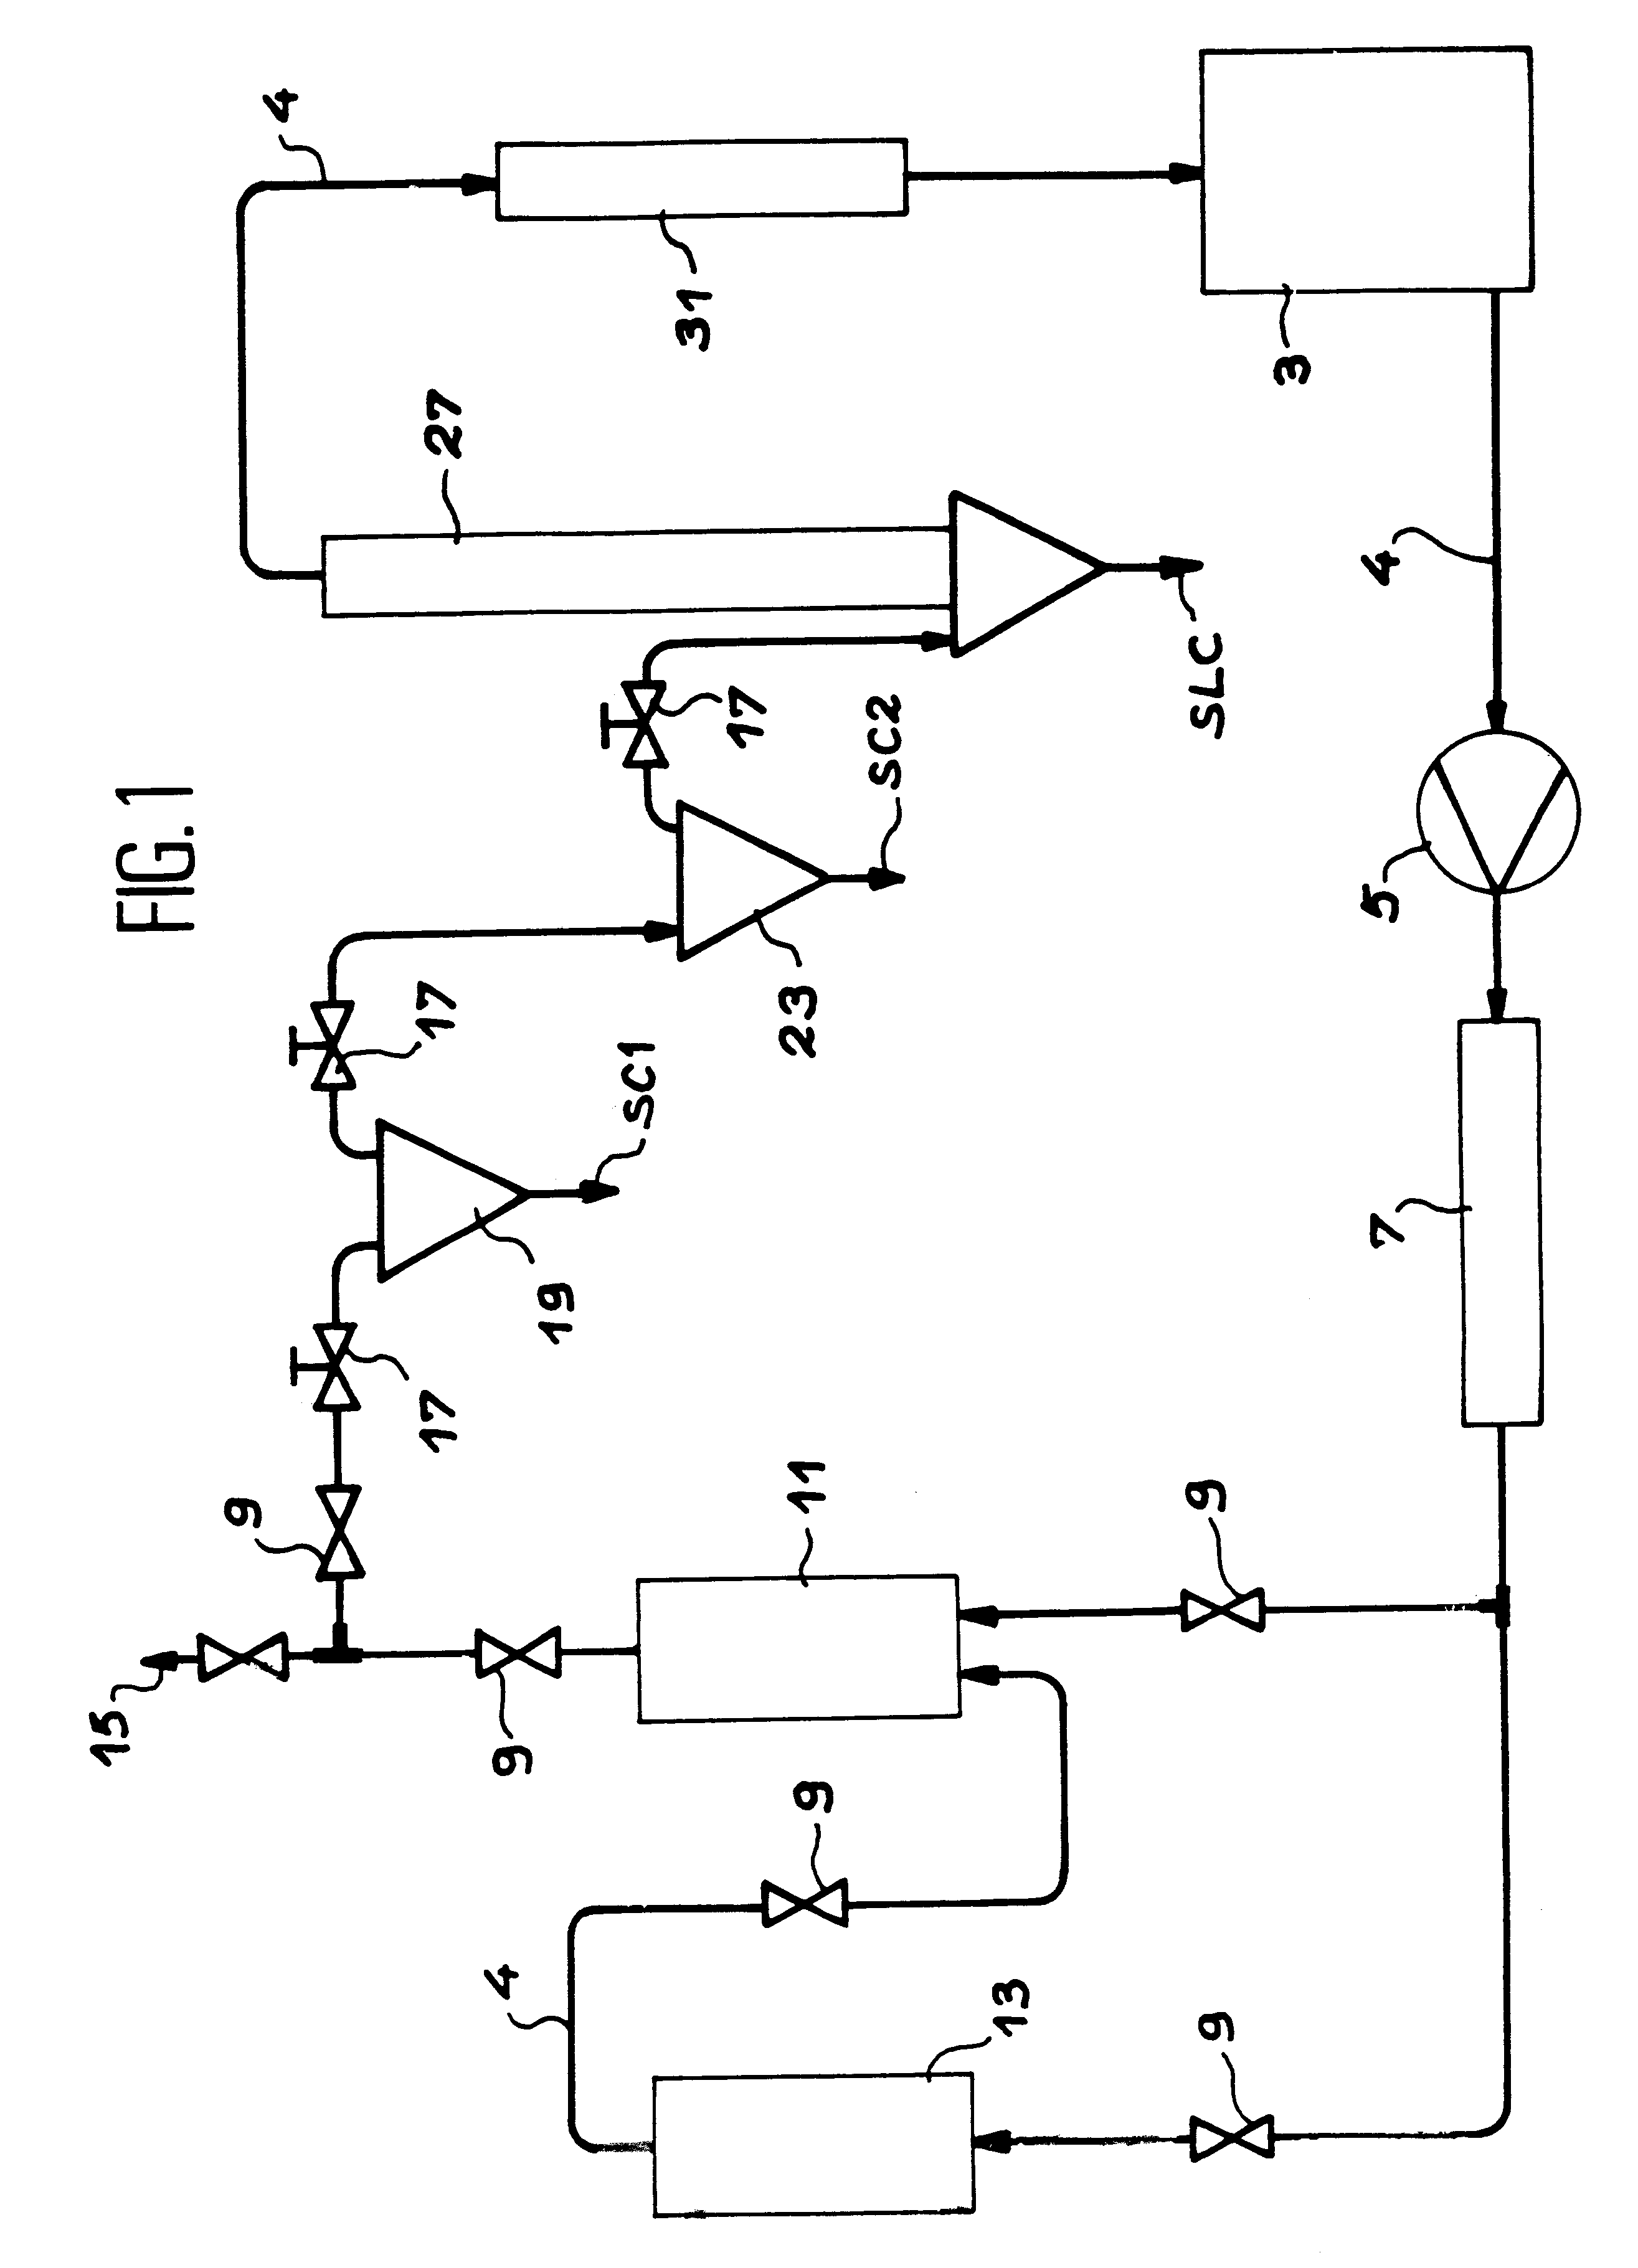 Method for making single or mixed metal oxides or silicon oxide